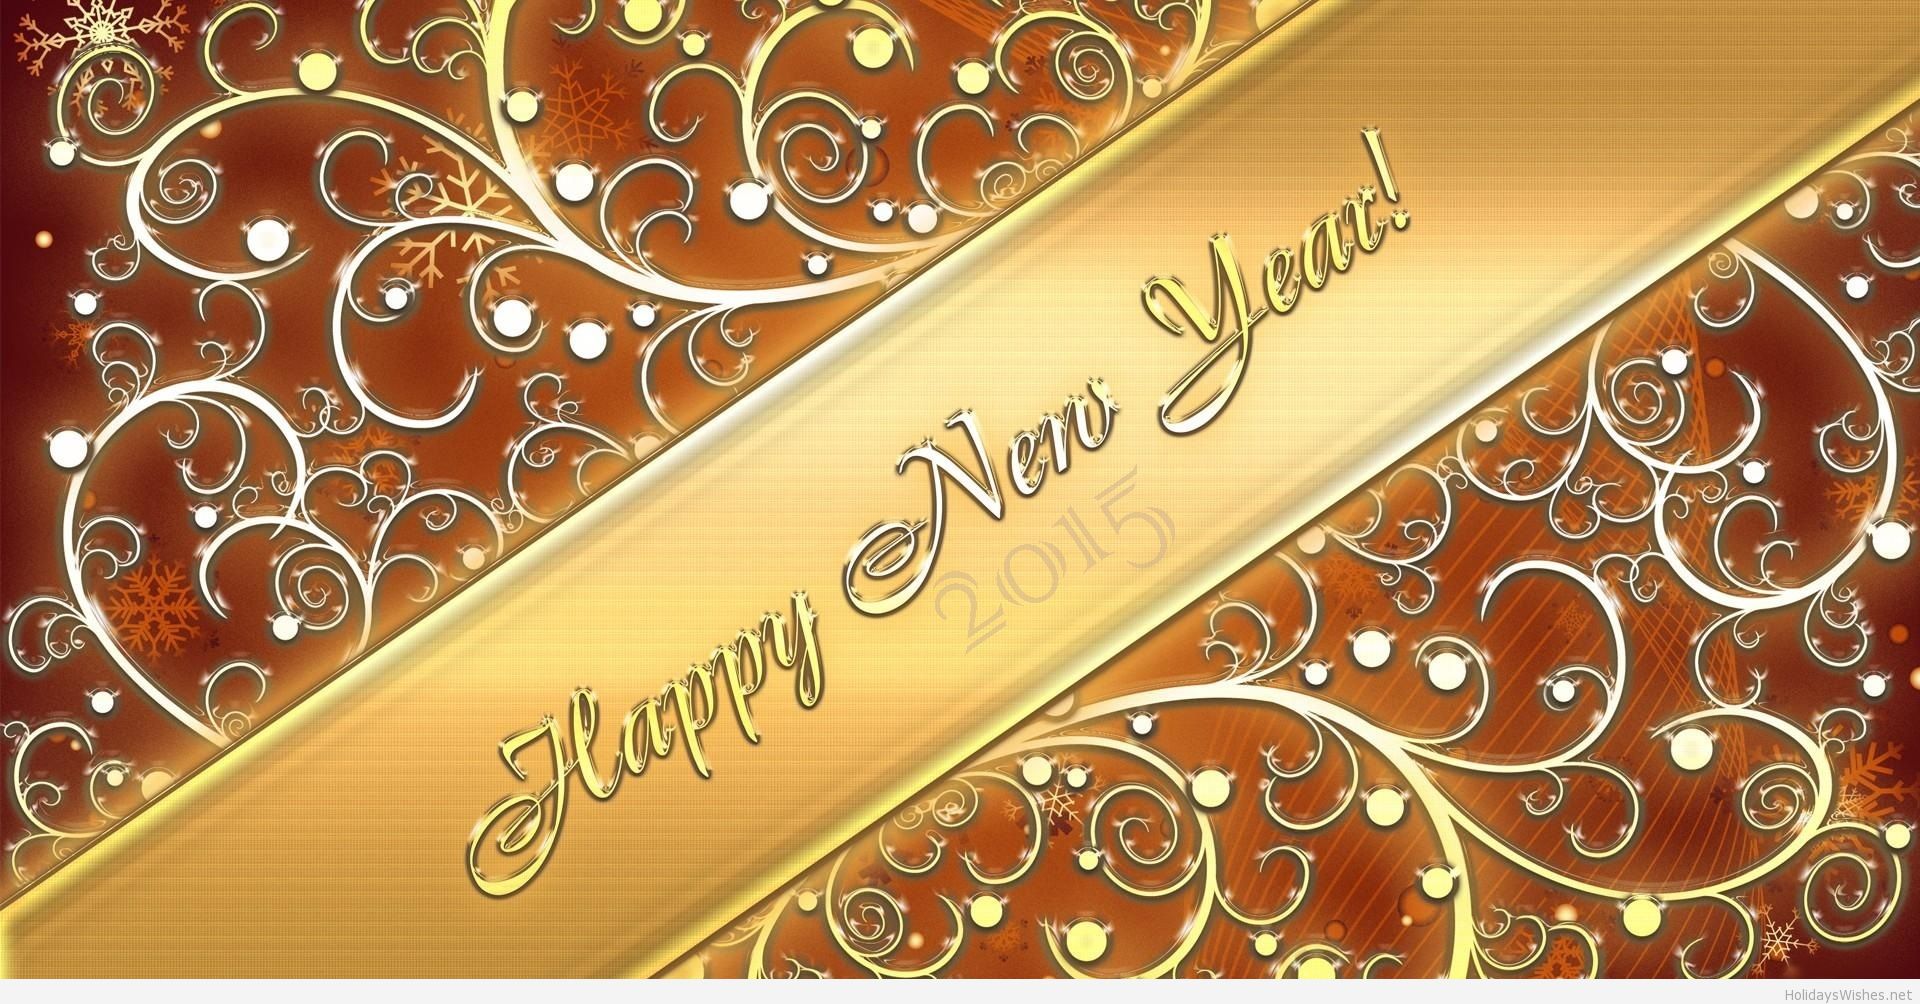 20 Best Colorful Happy New Year Wallpapers 2015 Smash Blog Trends 1920x1004